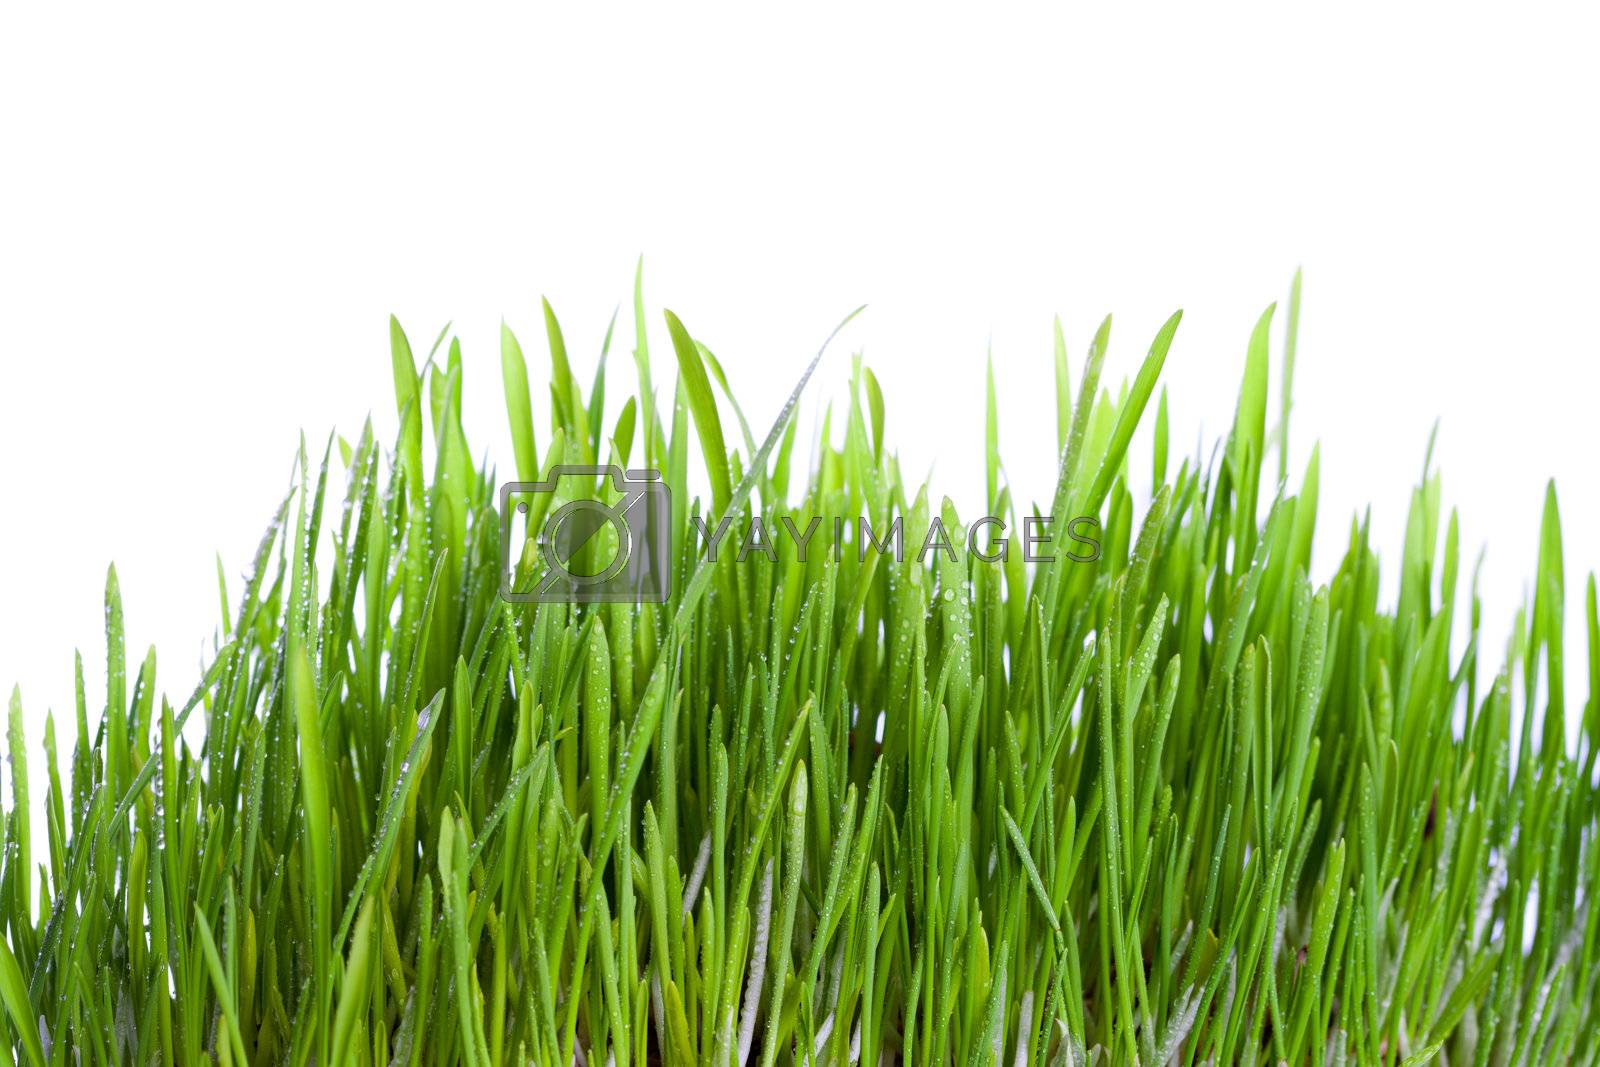 Royalty free image of fresh wet grass  by marylooo